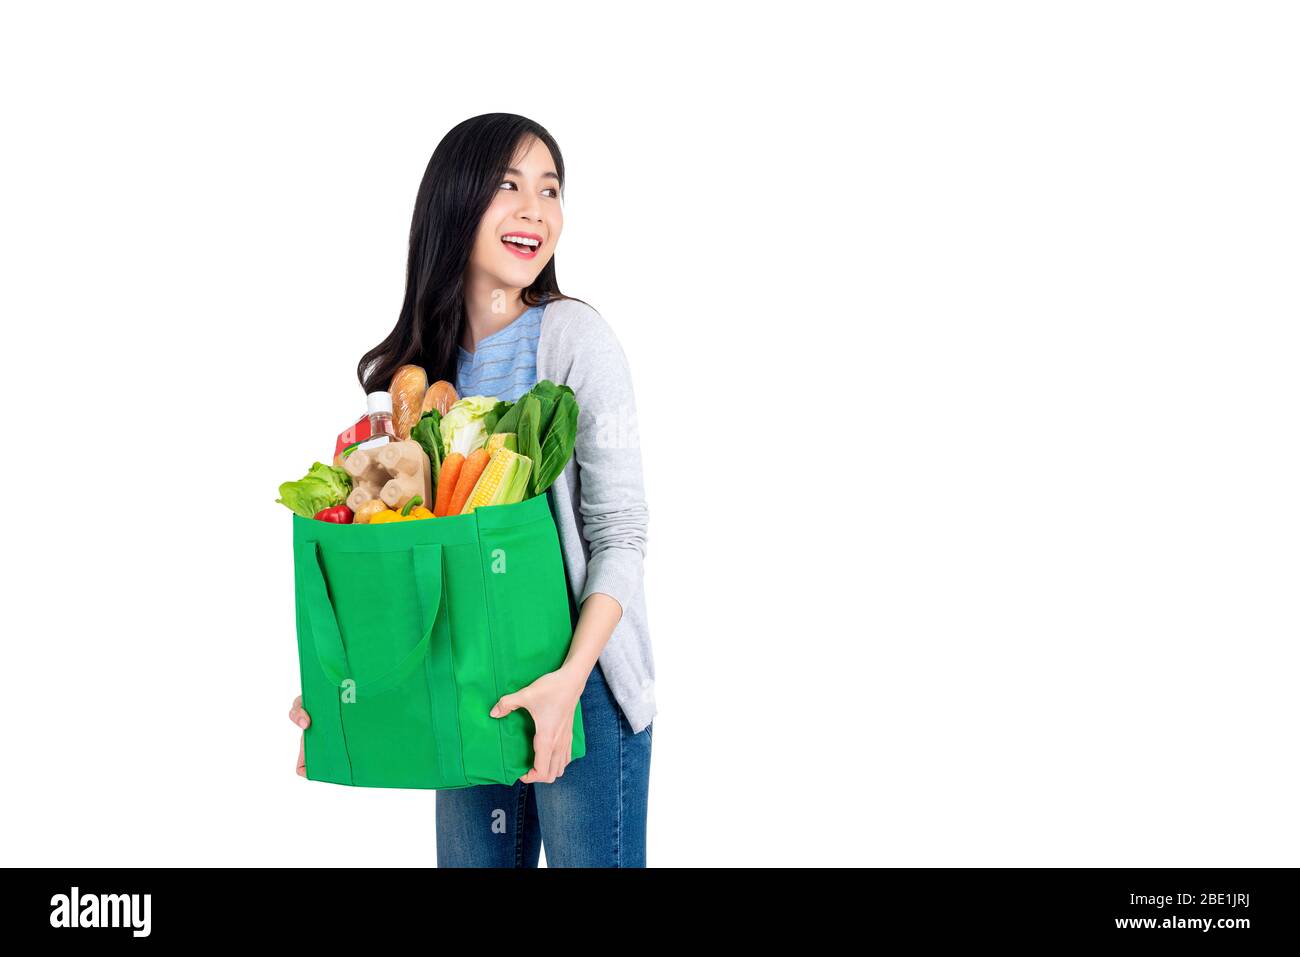 Beautiful smiling Asian woman holding reusable green shopping bag full of groceries and looking to copy space aside isolated on white background Stock Photo